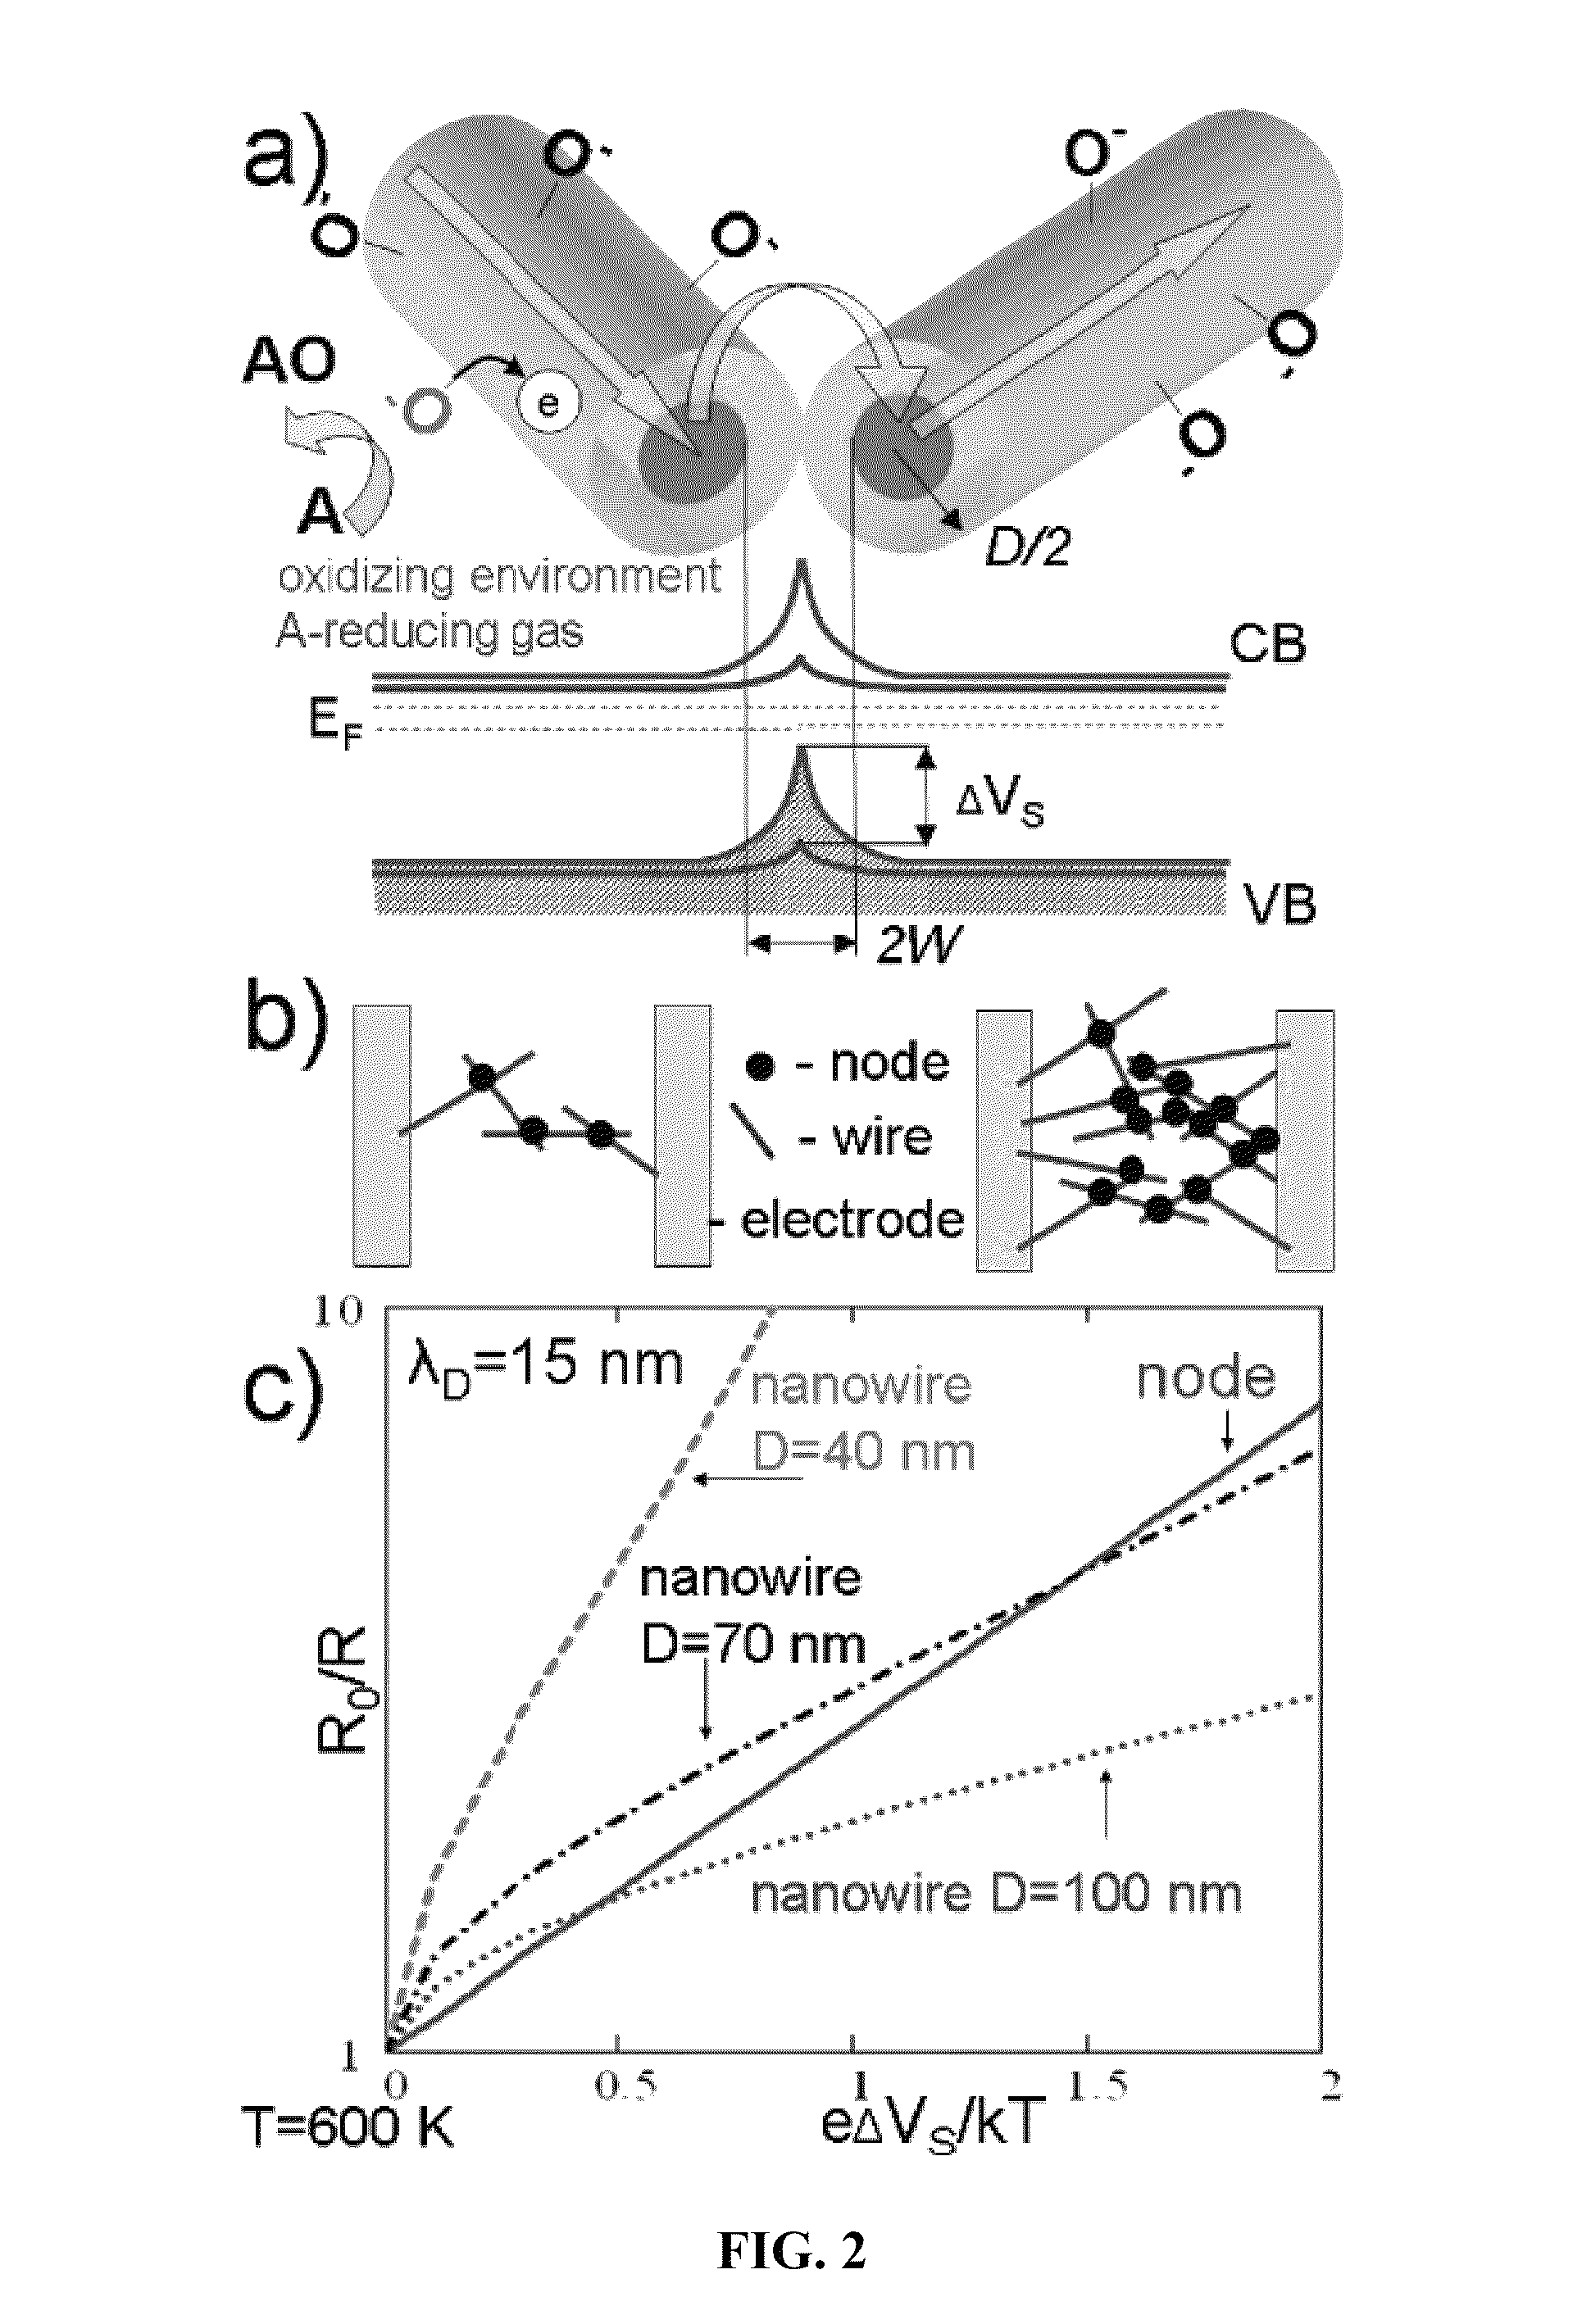 Analyte multi-sensor for the detection and identification of analyte and a method of using the same